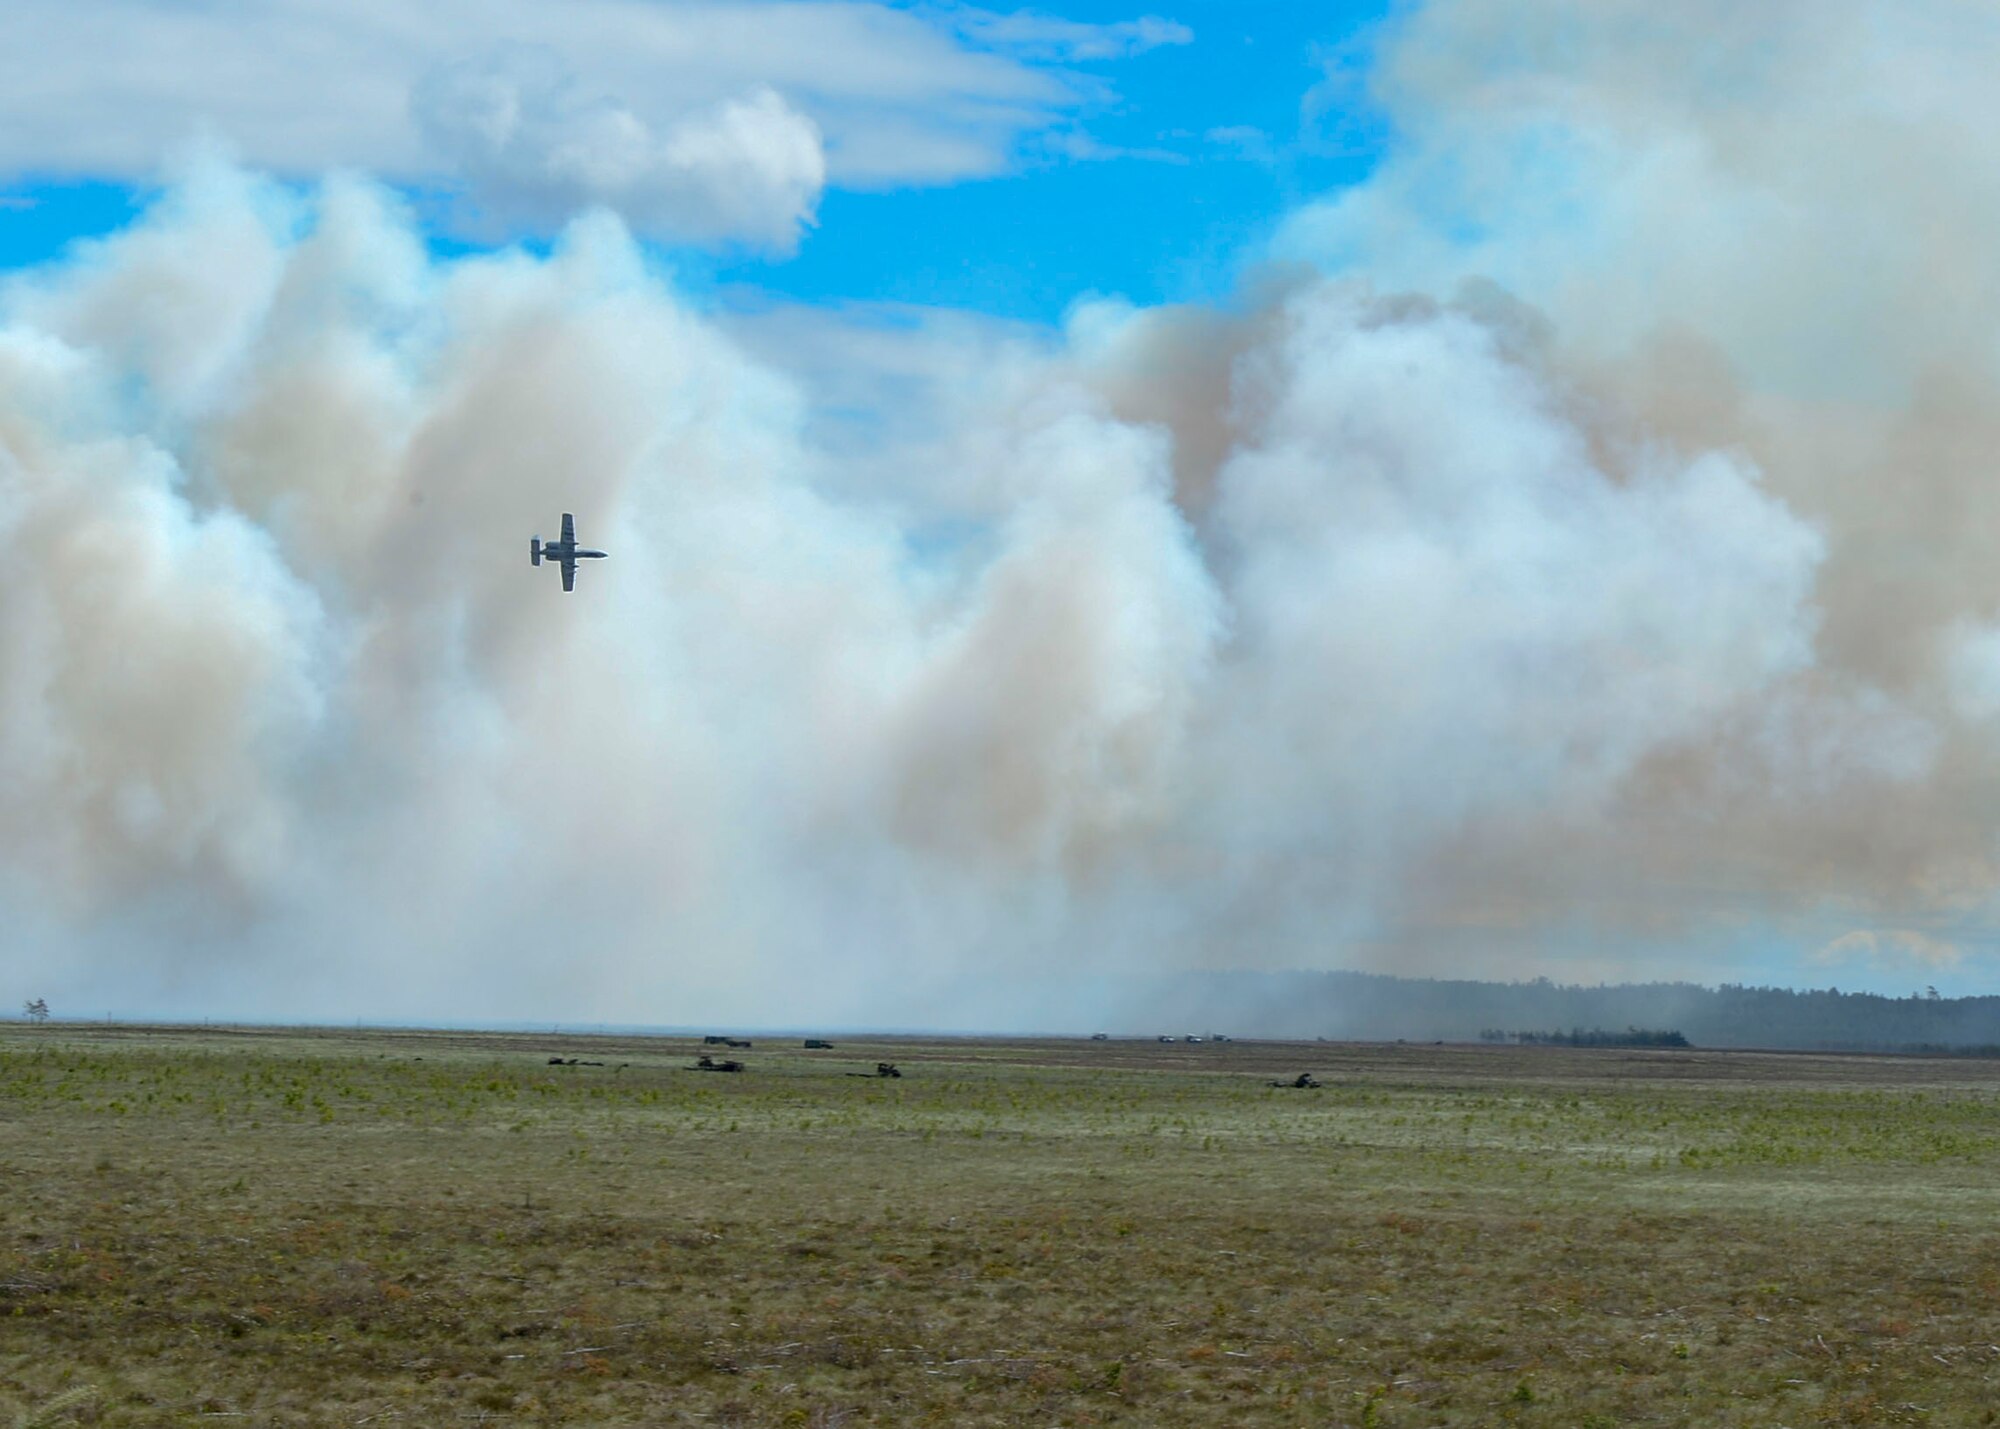 An A-10 Thunderbolt II flies past a plume of smoke during Saber Strike 18 at a field in Adazi, Latvia on June 5, 2018. A-10s deploy from the 127th Wing at Selfridge Air National Guard Base, Michigan, worked with Joint Terminal Attack Controllers during the exercise to improve synergy between the air and land components of warfighting. (U.S. Air Force photo by Staff Sgt. Jimmie D. Pike)